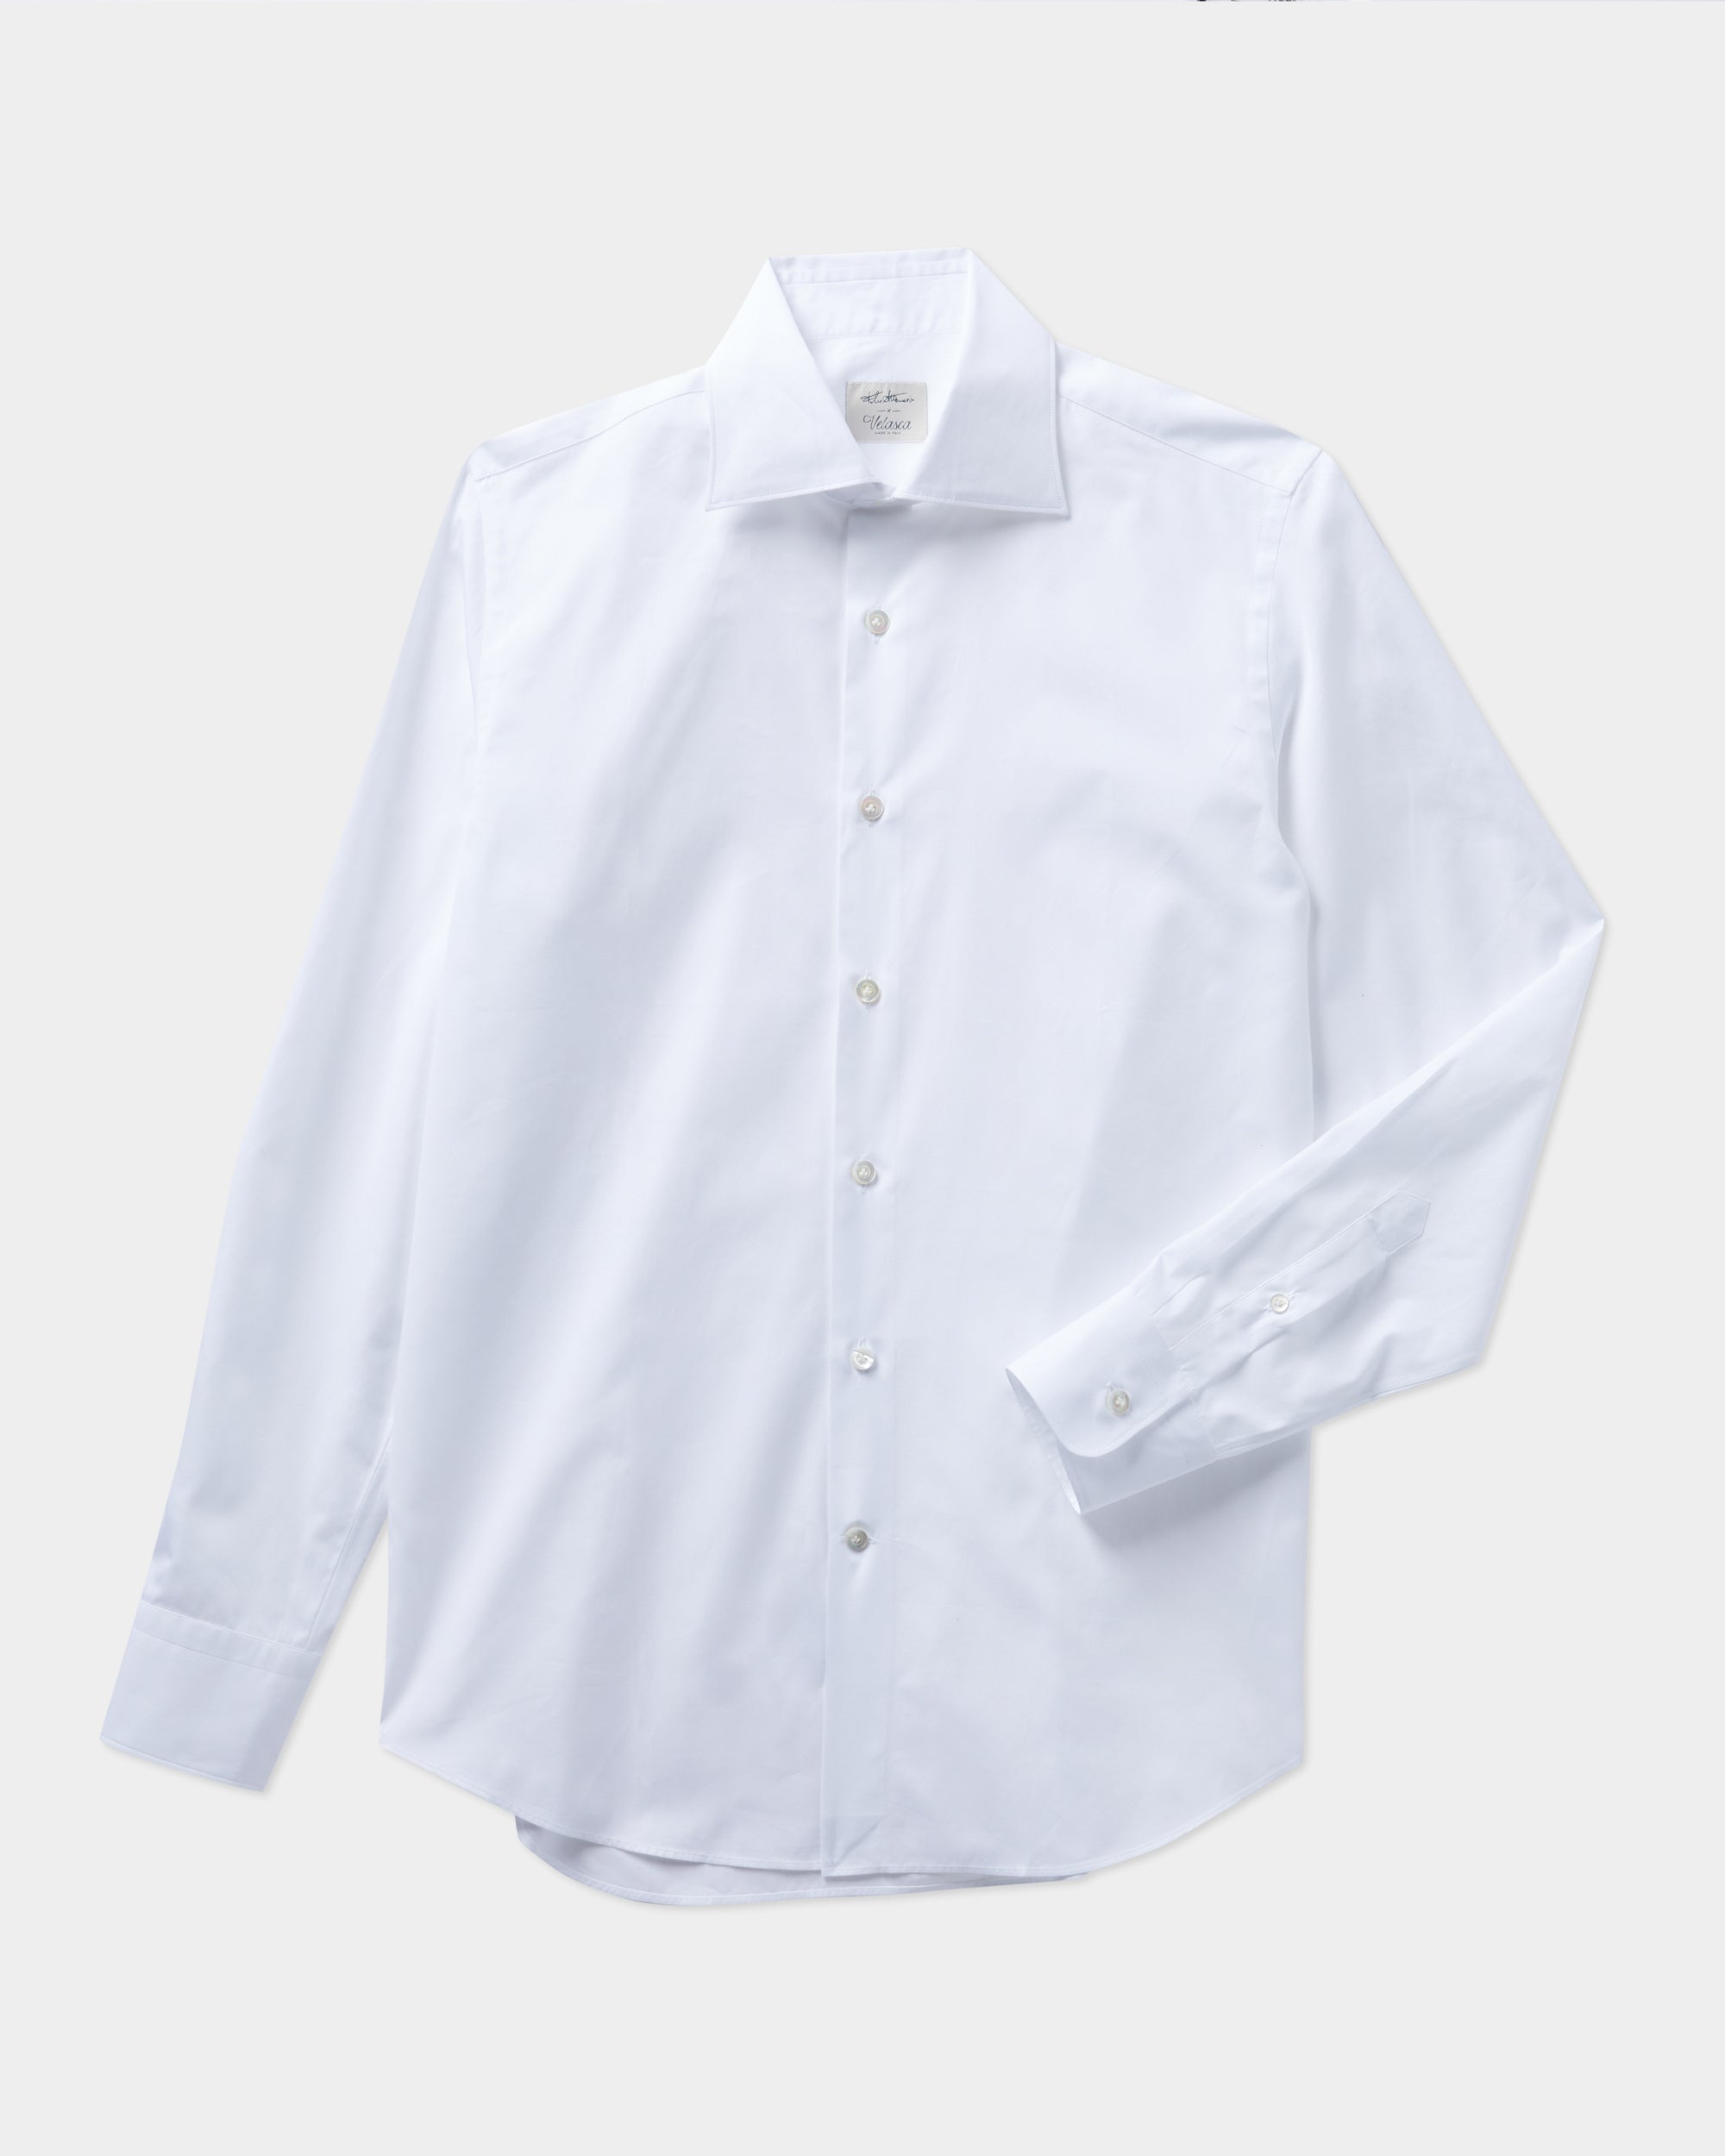 Velasca | Men's white cotton button-down shirt, made in Italy